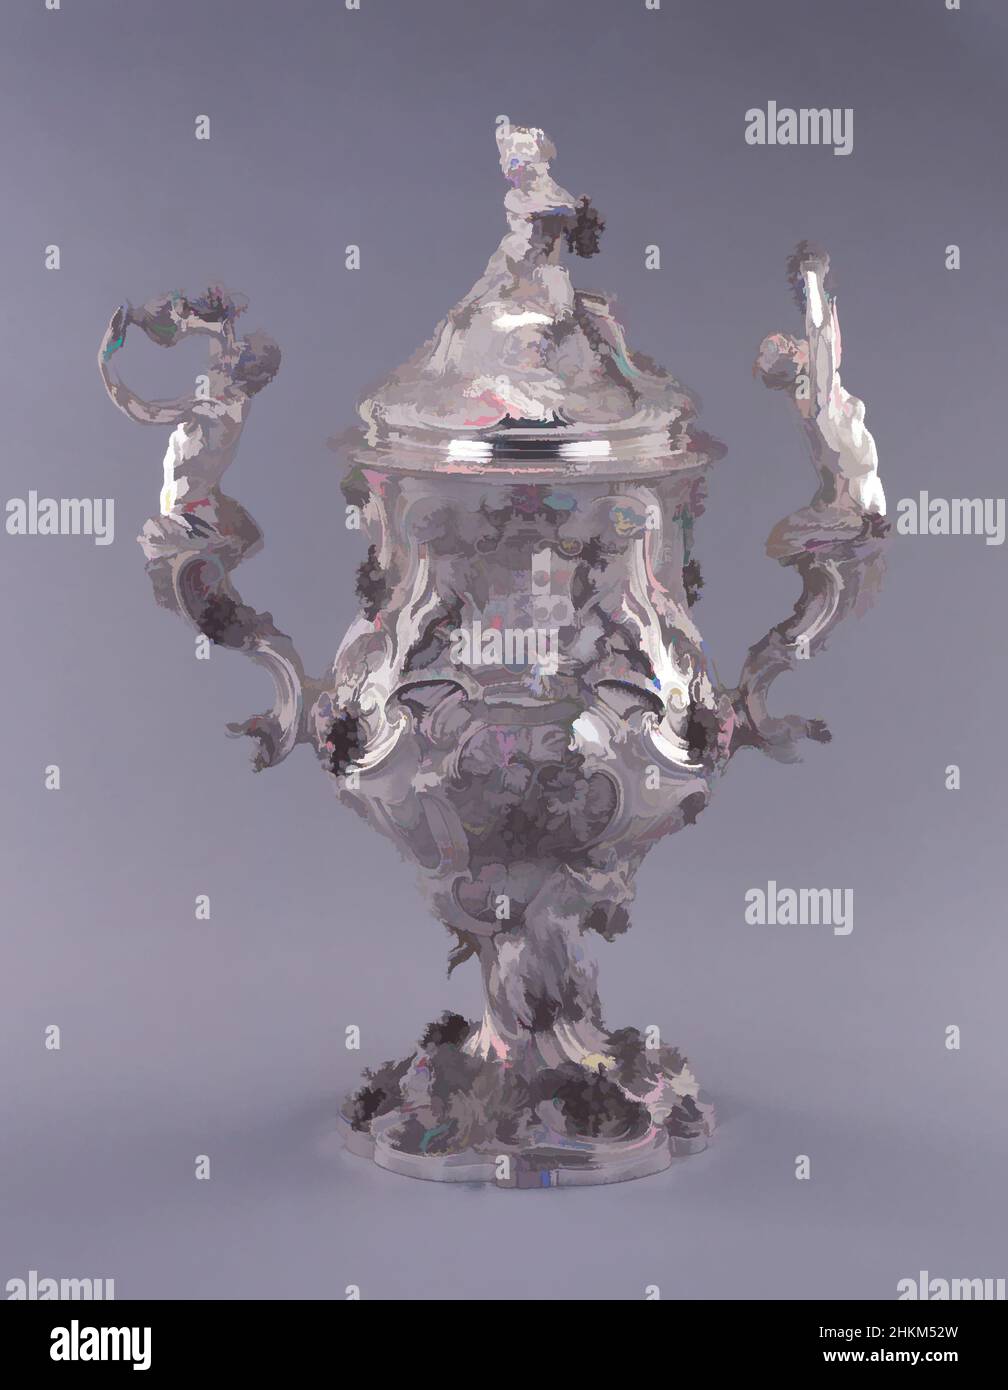 Art inspired by Two-Handled Cup and Cover, Charles Frederick Kandler, English (born Germany), active c.1735, died 1778, 1749-50, Silver, Made in London, Greater London, England, Europe, Metalwork, Gallery 122, cup and lid: 16 7/8 x 14 x 7 in. (42.9 x 35.6 x 17.8 cm, Classic works modernized by Artotop with a splash of modernity. Shapes, color and value, eye-catching visual impact on art. Emotions through freedom of artworks in a contemporary way. A timeless message pursuing a wildly creative new direction. Artists turning to the digital medium and creating the Artotop NFT Stock Photo